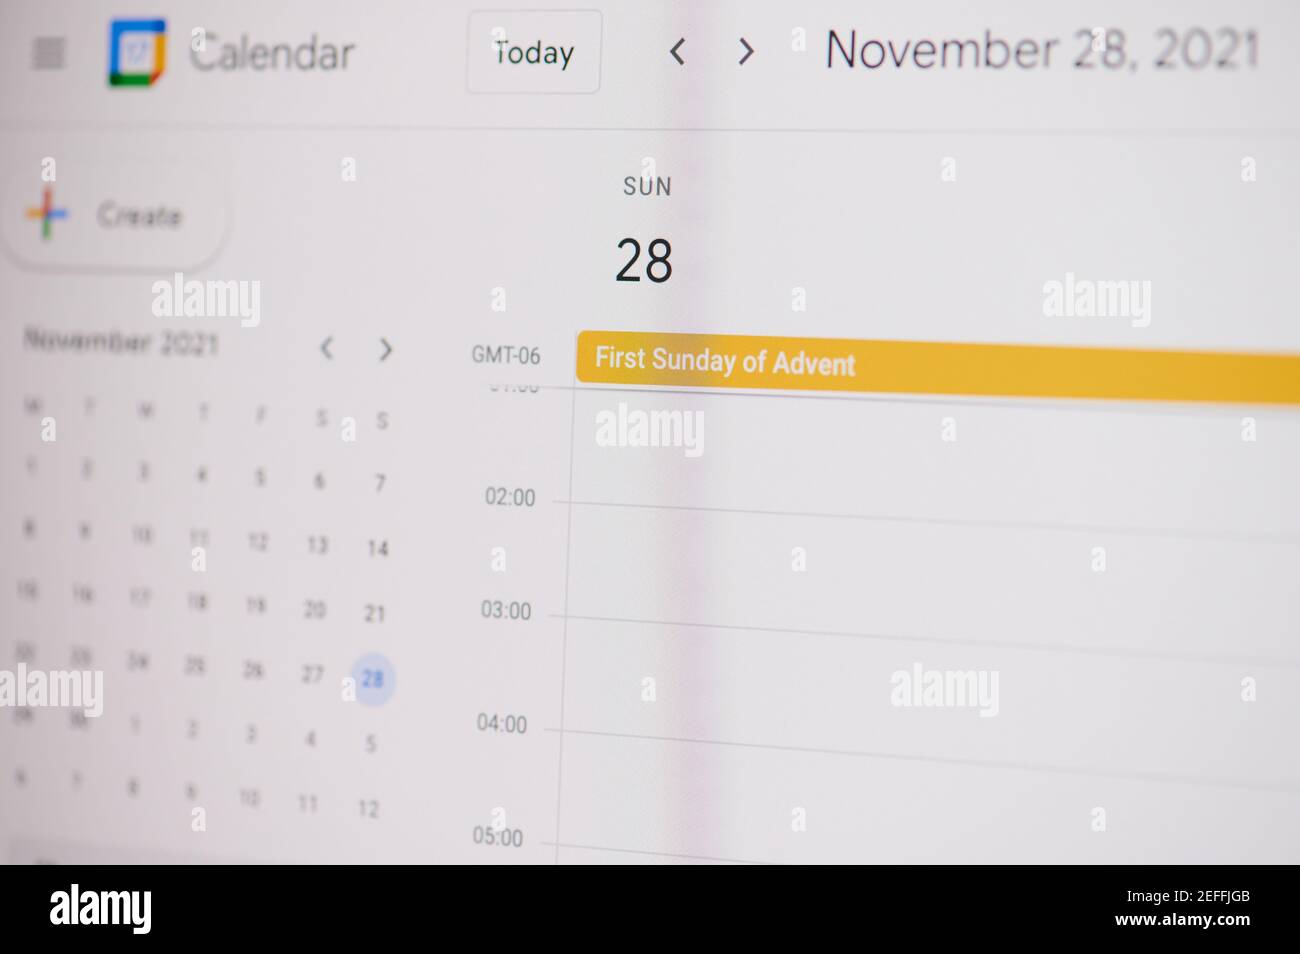 New york, USA - February 17, 2021: 31 First sunday advent 28 of November on google calendar on laptop screen close up view. Stock Photo